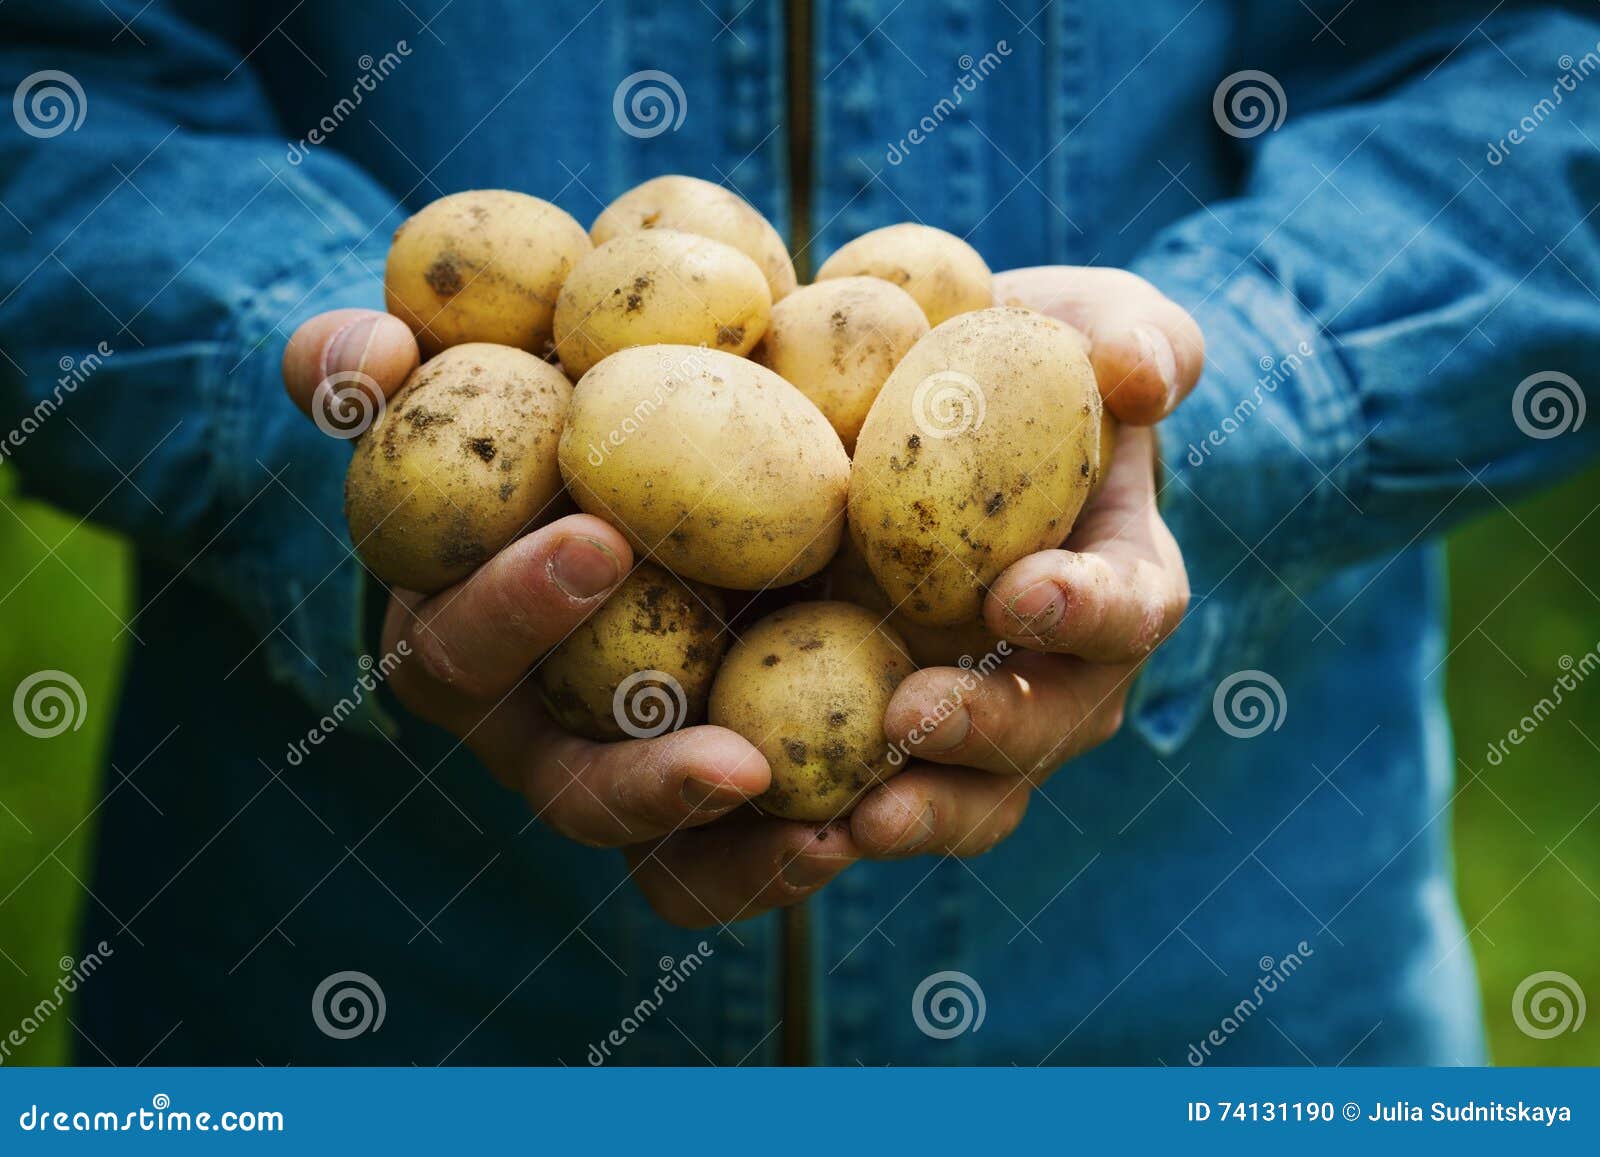 farmer holding in hands the harvest of potatoes in the garden. organic vegetables. farming.